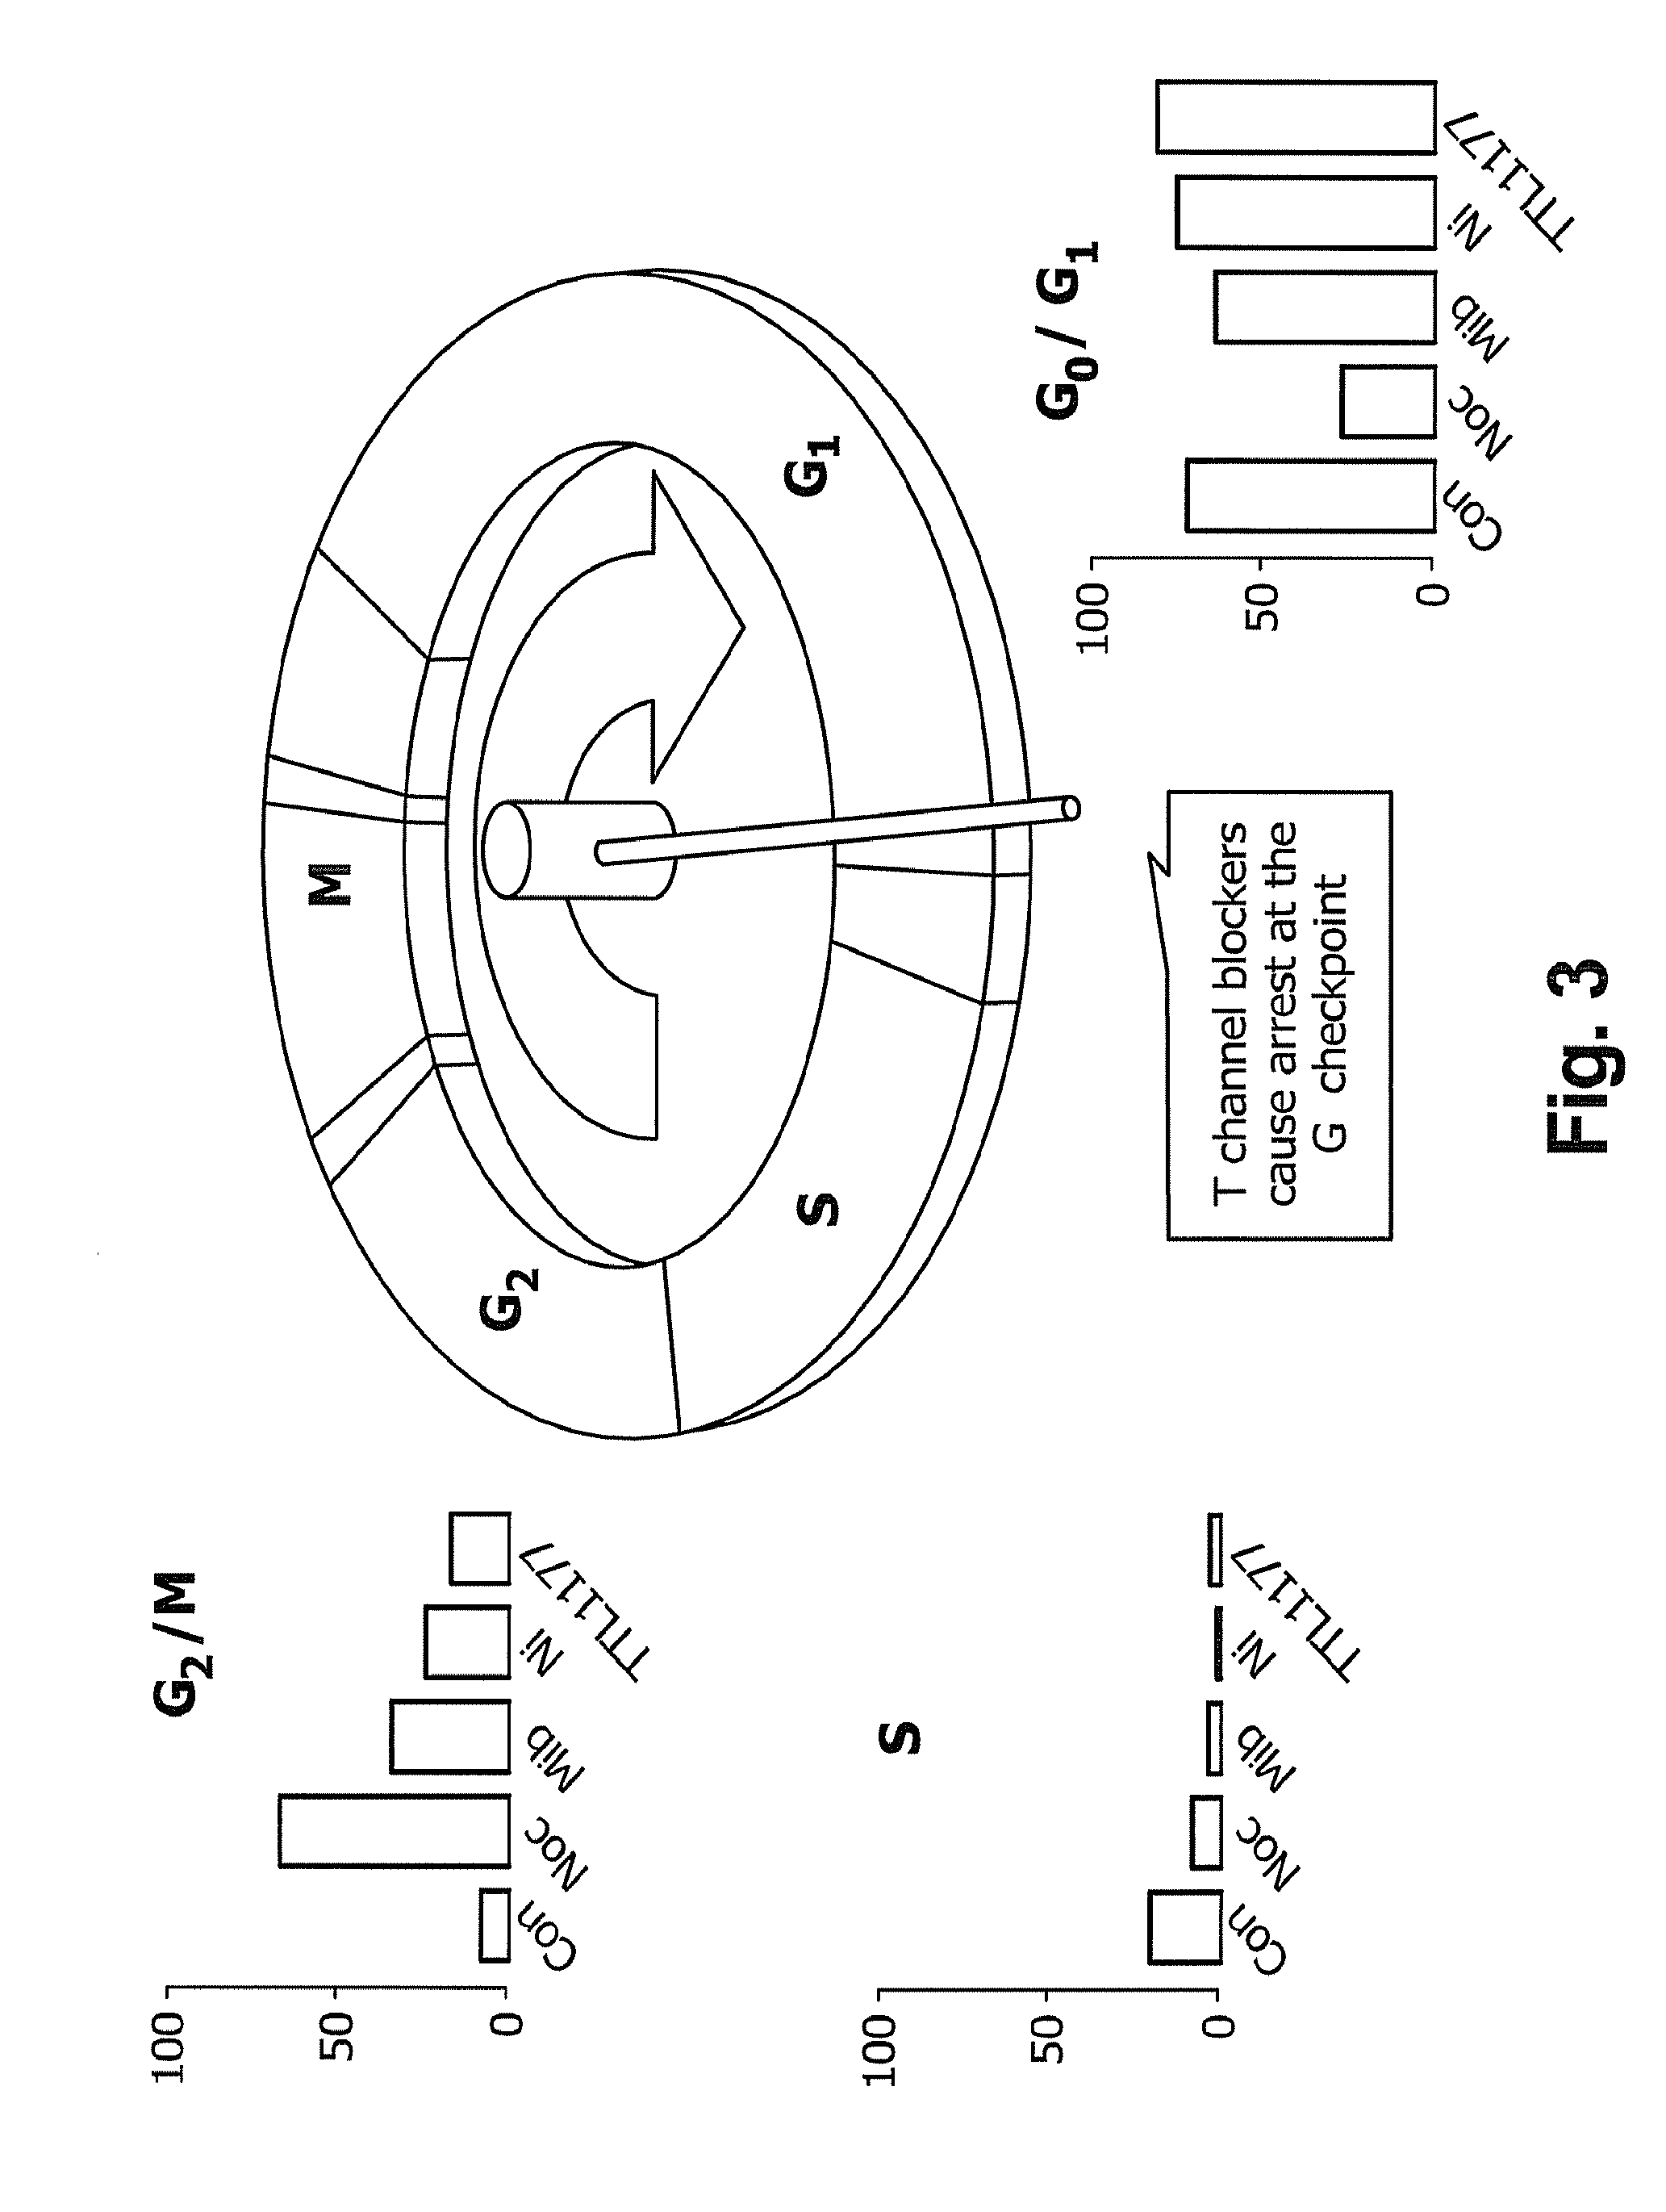 Interlaced method for treating cancer or a precancerous condition